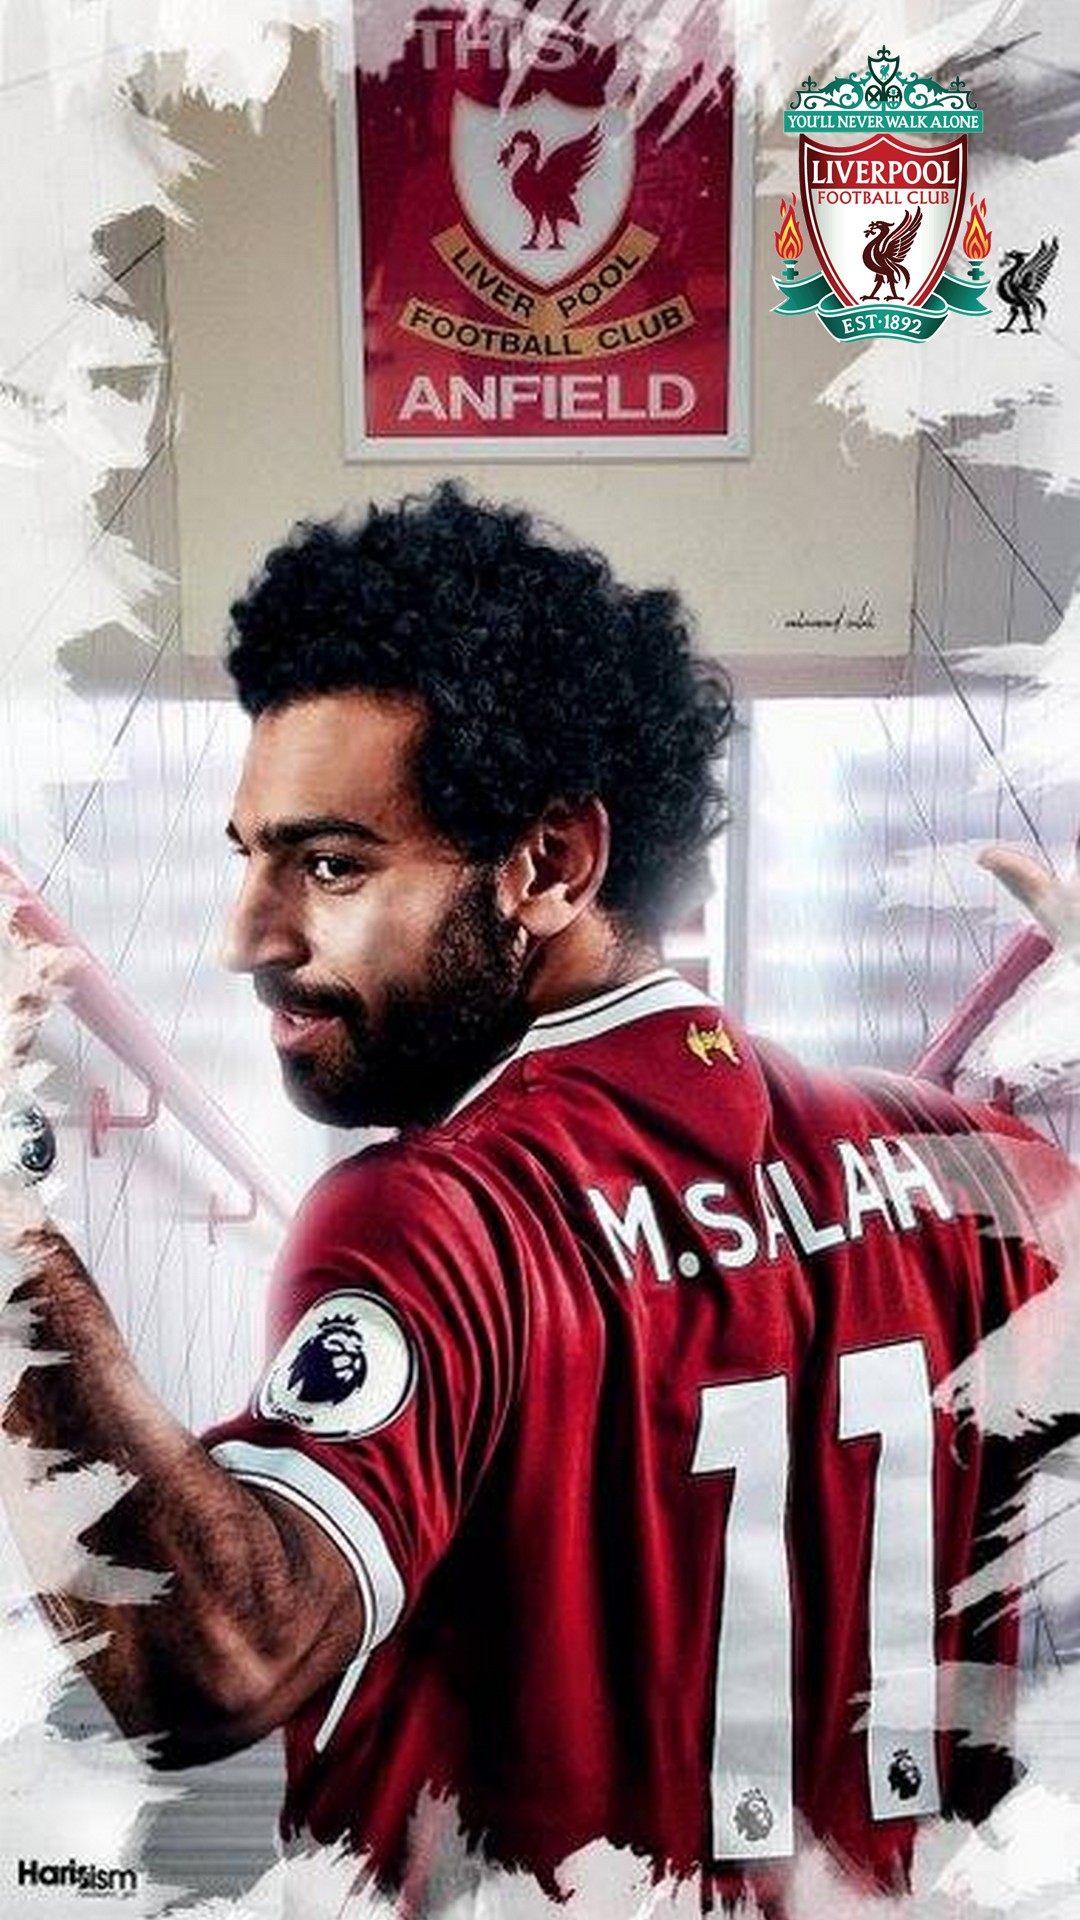 Mohamed Salah Pictures iPhone Wallpaper with image resolution 1080x1920 pixel. You can make this wallpaper for your iPhone 5, 6, 7, 8, X backgrounds, Mobile Screensaver, or iPad Lock Screen